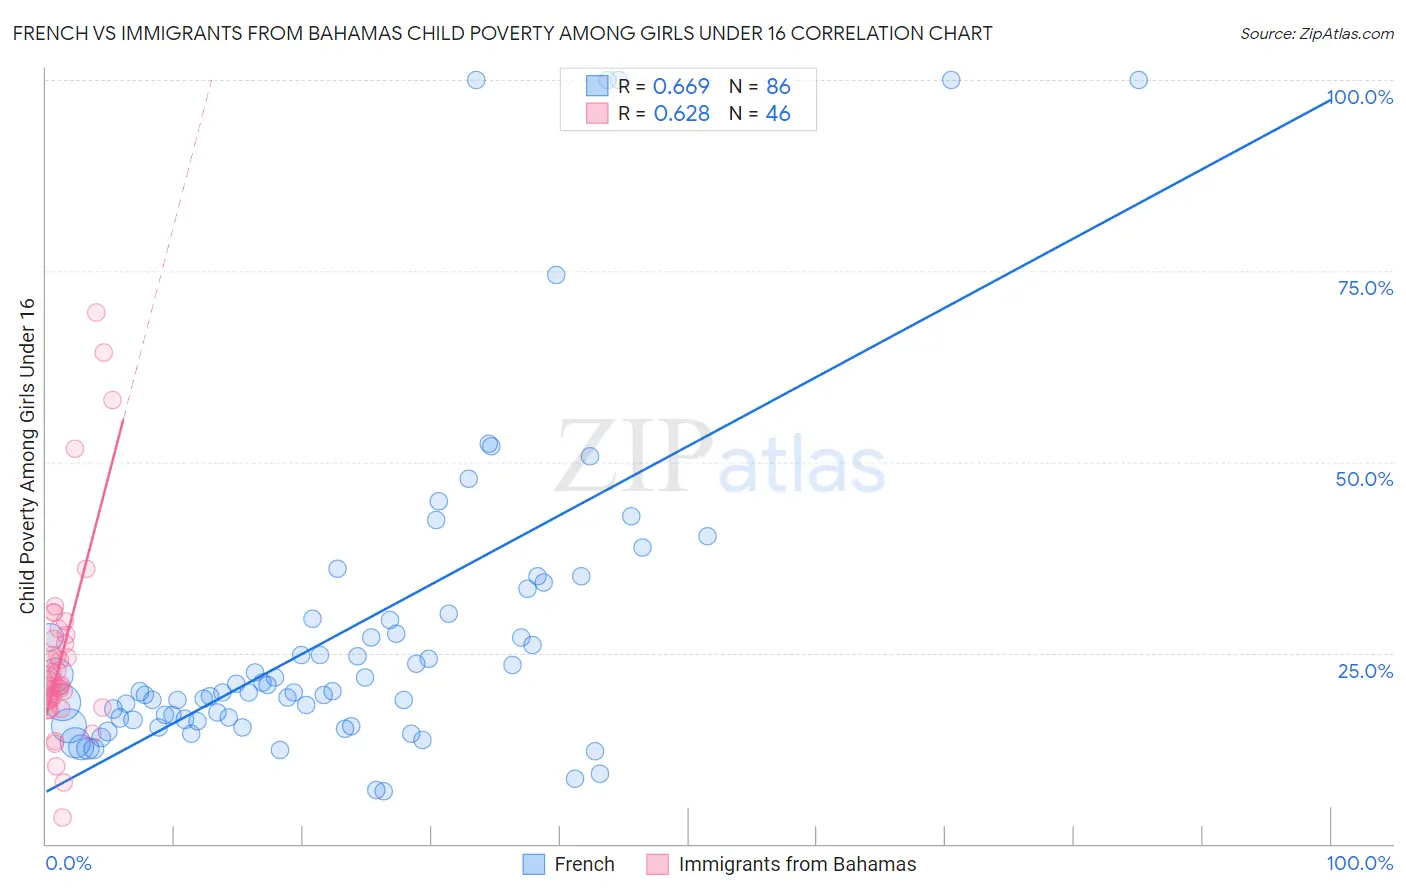 French vs Immigrants from Bahamas Child Poverty Among Girls Under 16